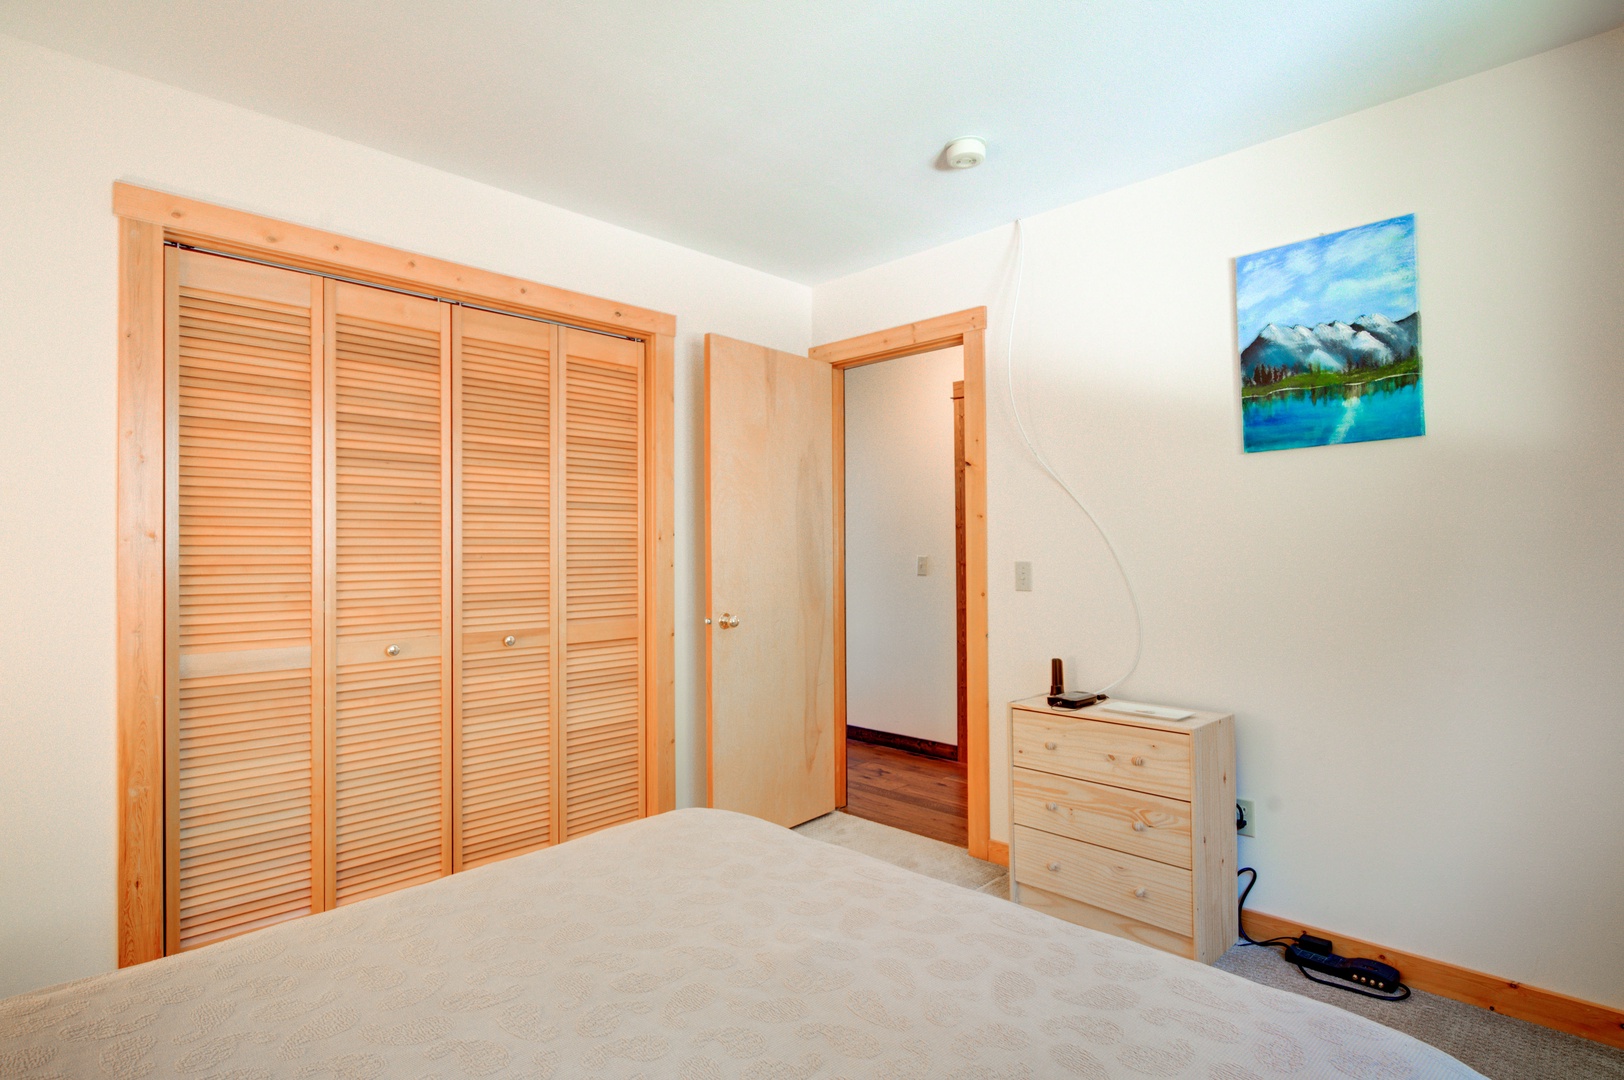 Bozeman Vacation Rentals, The Canyon Lookout - Plenty of closet space